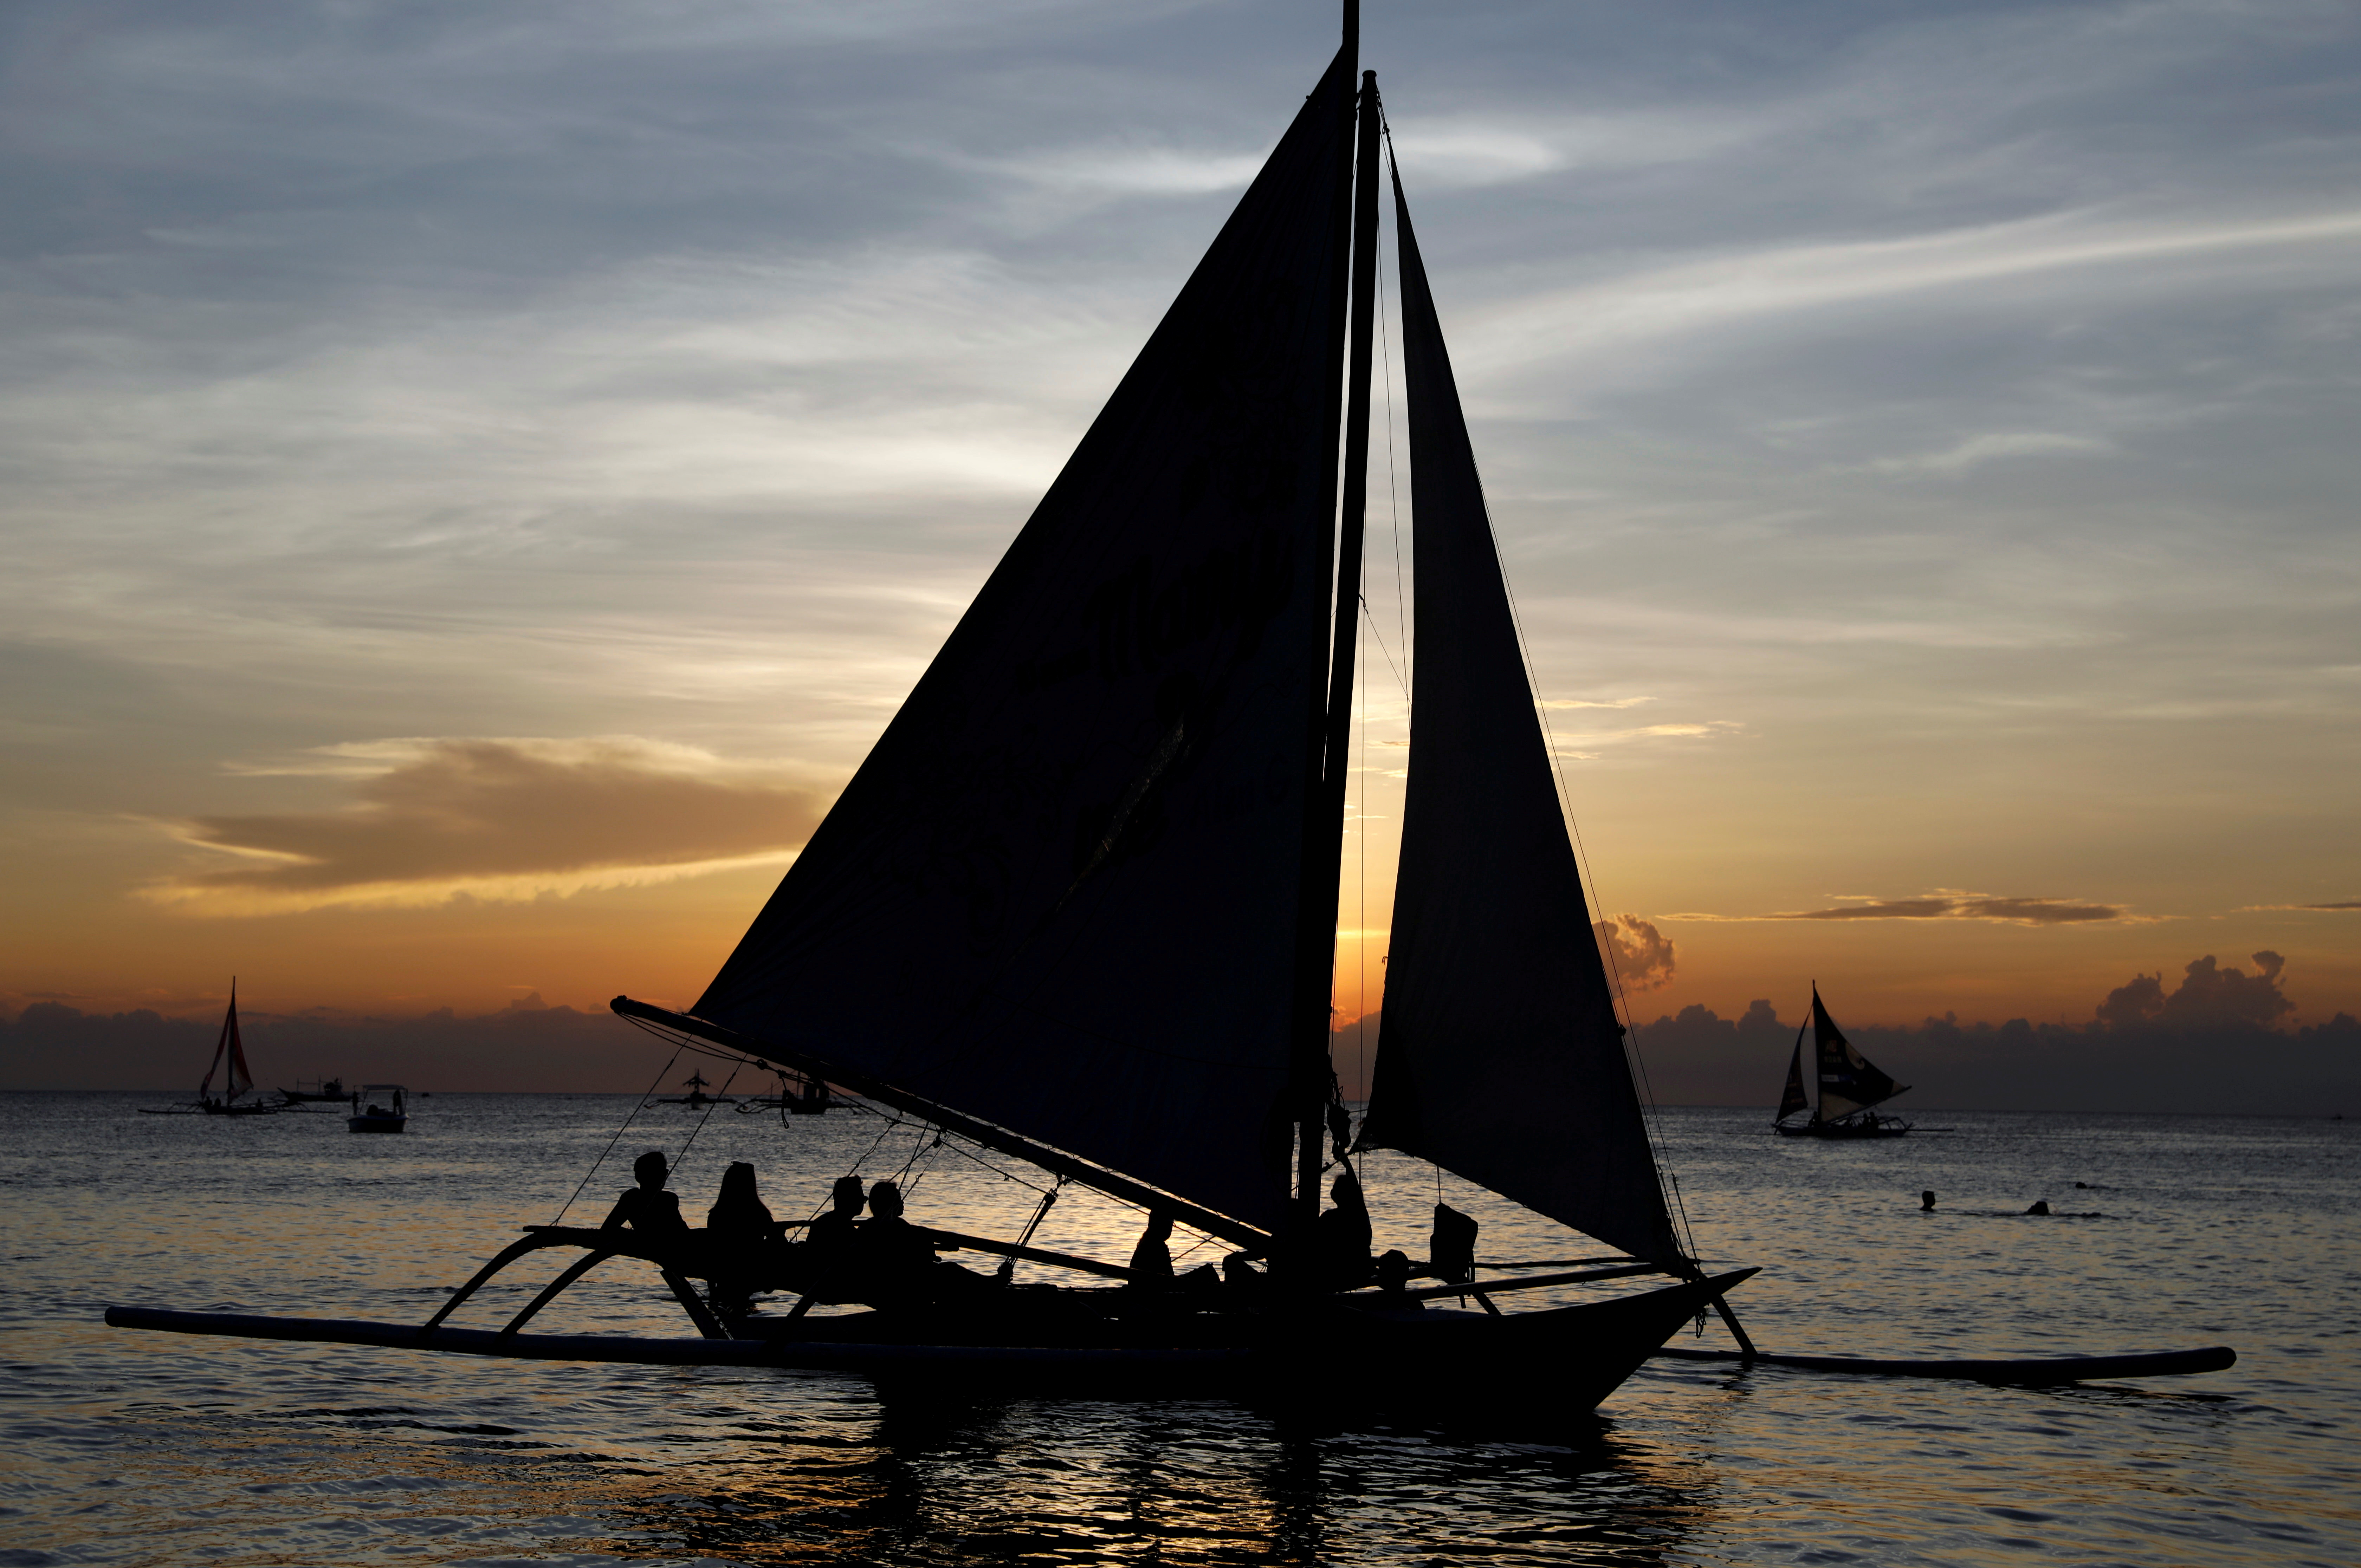 Tourists watch sunset aboard sailboats, one day before the temporary closure of the holiday island Boracay, in the Philippines